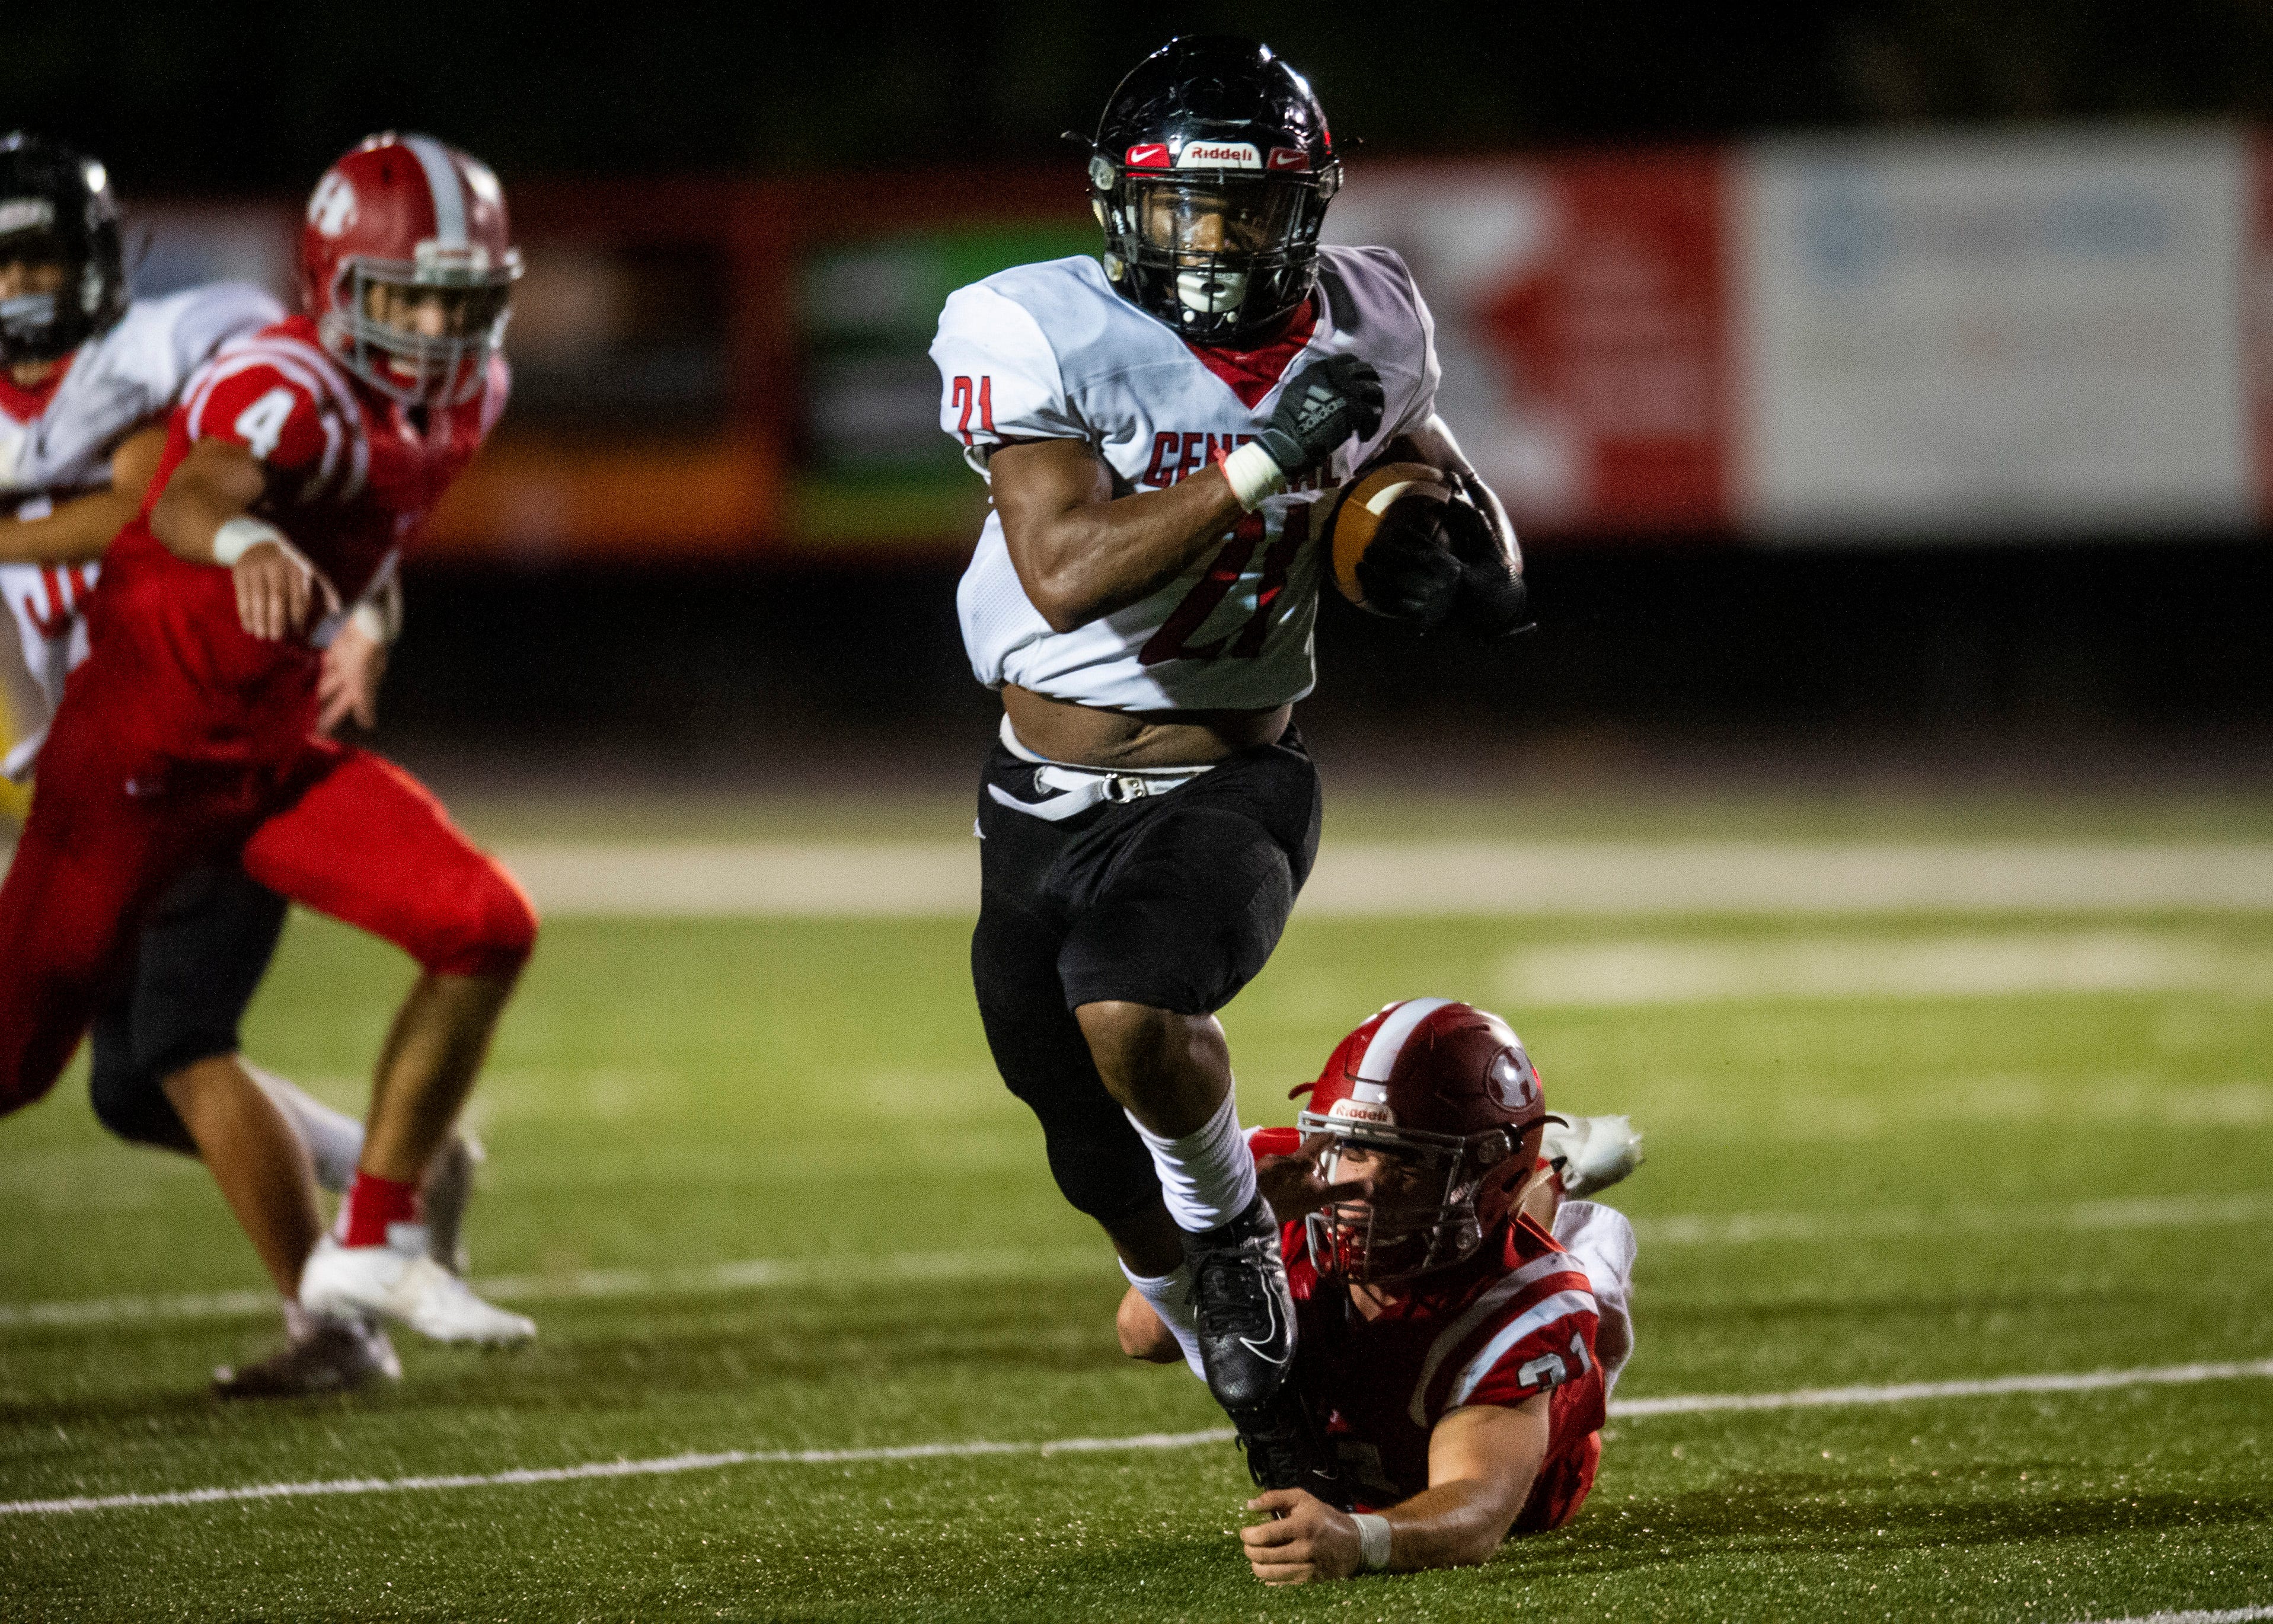 Central's Makhi Anderson (21) runs past Halls' Brett McMahan (31) during the Halls and Central high school football game on Friday, October 4, 2019 at Halls High School.